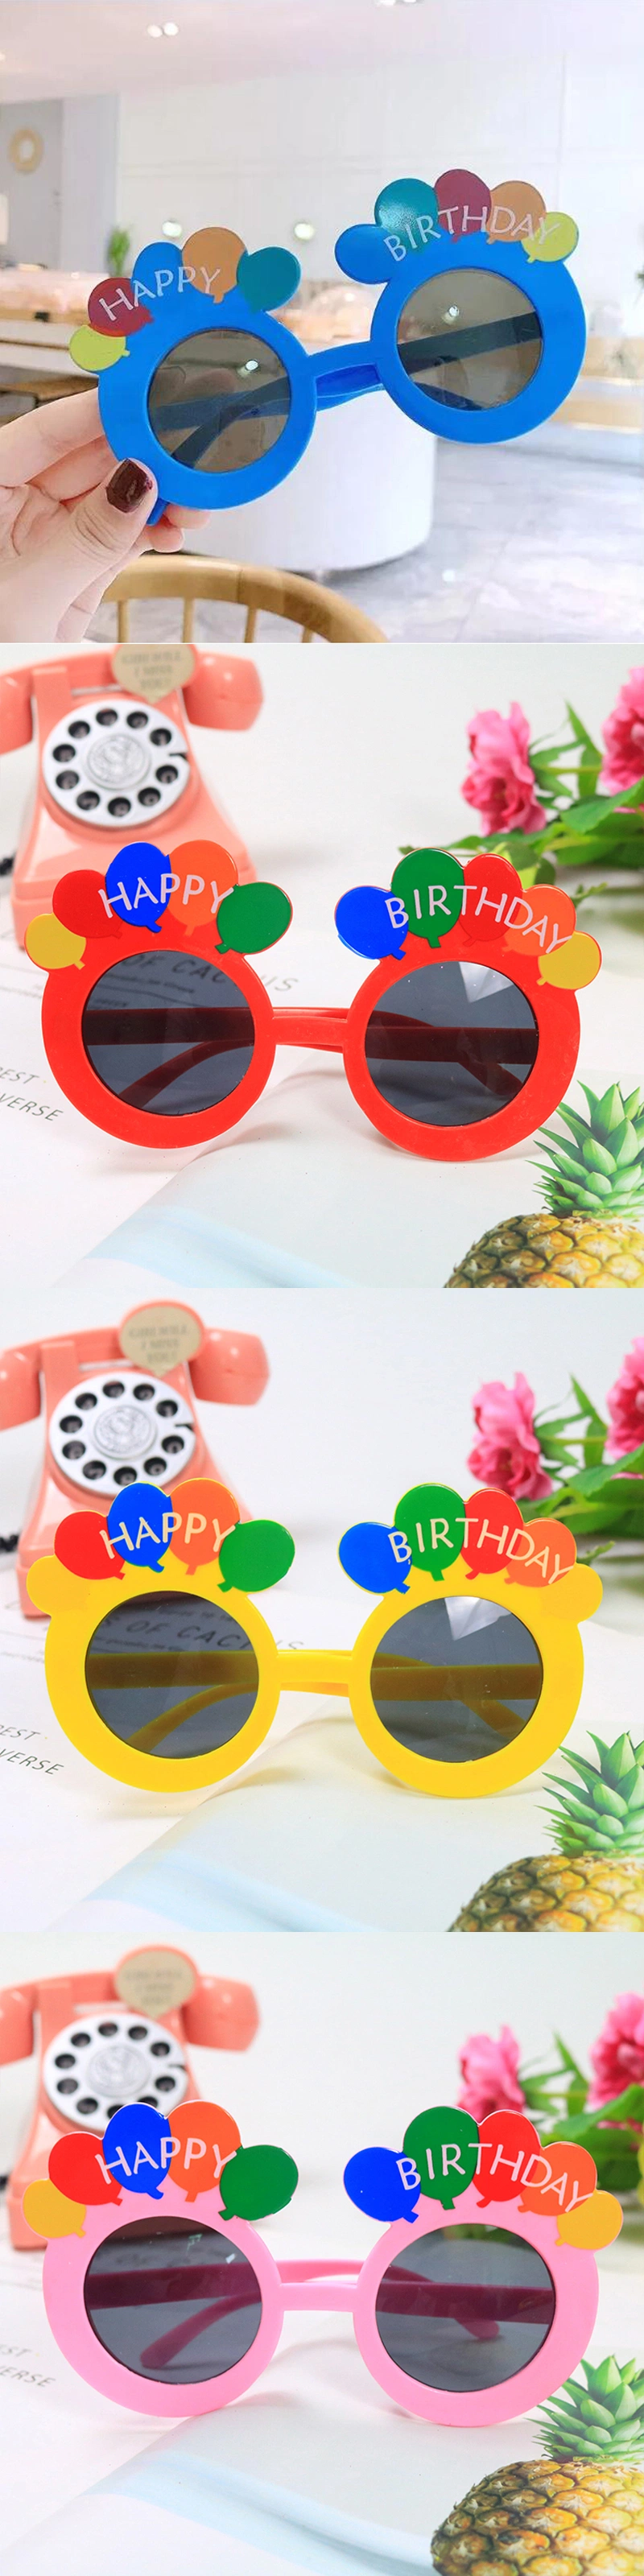 Cute Balloon Birthday Gifts Festival Sunglasses Happy Birthday Party Sun Glasses Promotional Gift Toys Novel Kids Glasses